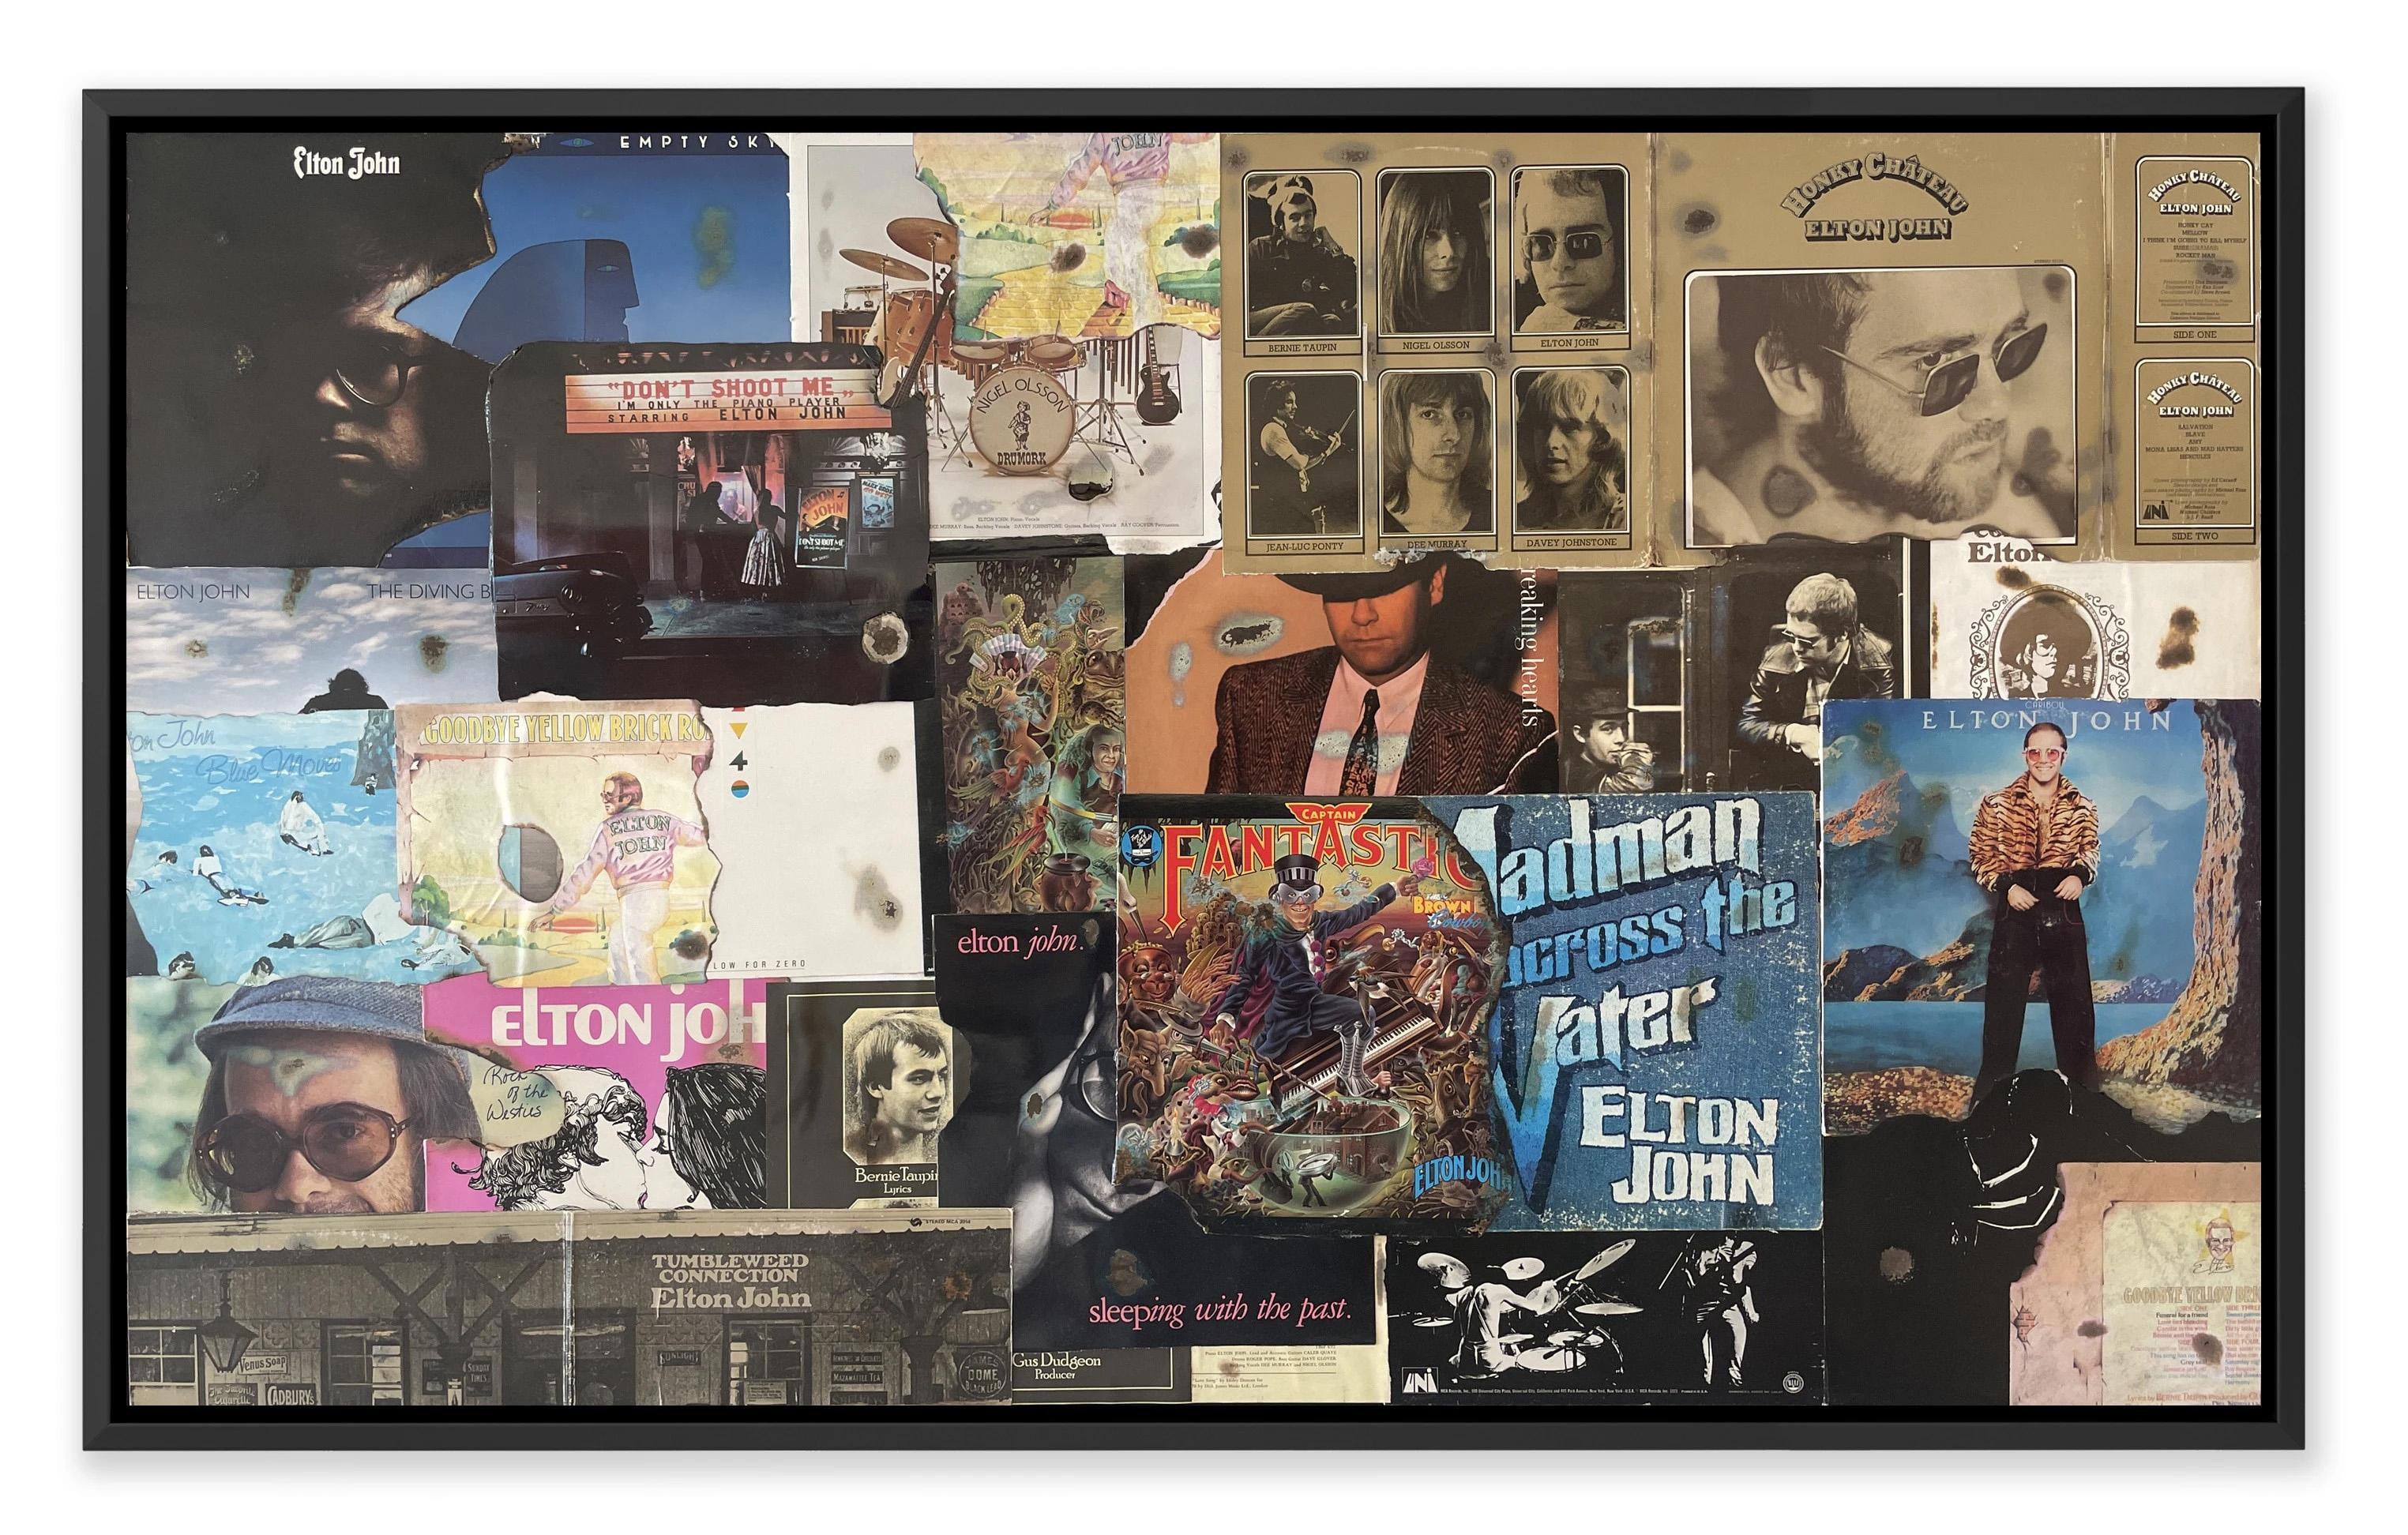 MEDIUM: Original Vinyl Records Collage, Used for Monoprints
IMAGE SIZE: 36" x 48"
SKU: BT0020

"Vinyl Covers" unites various Elton John records into a single captivating artwork, celebrating their iconic collaboration while highlighting Taupin's